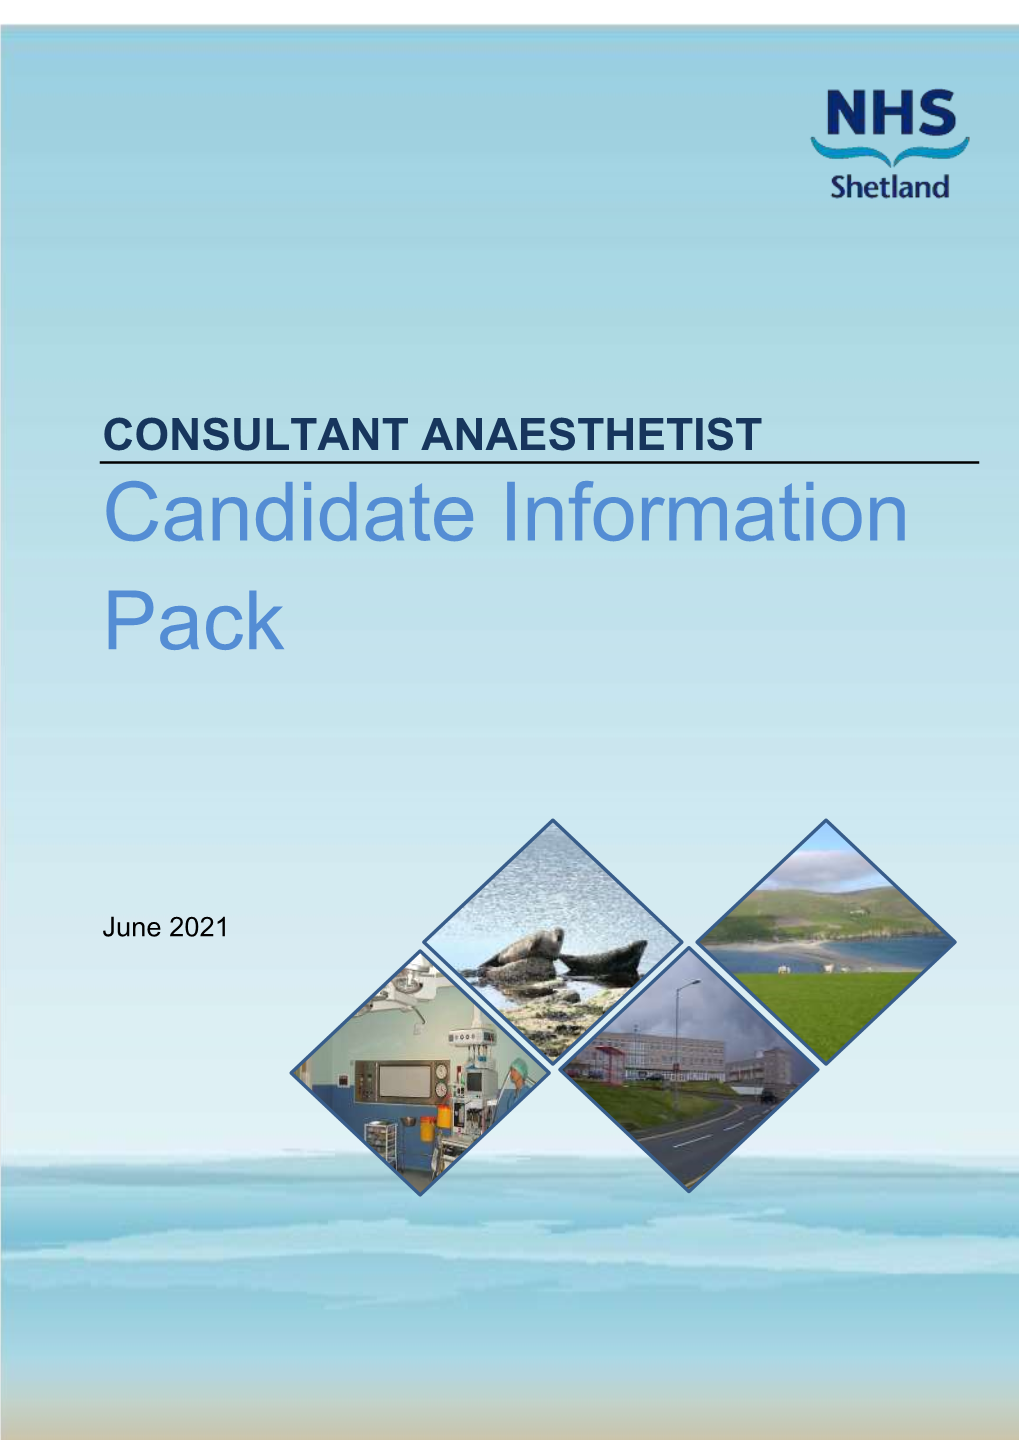 CONSULTANT ANAESTHETIST Candidate Information Pack